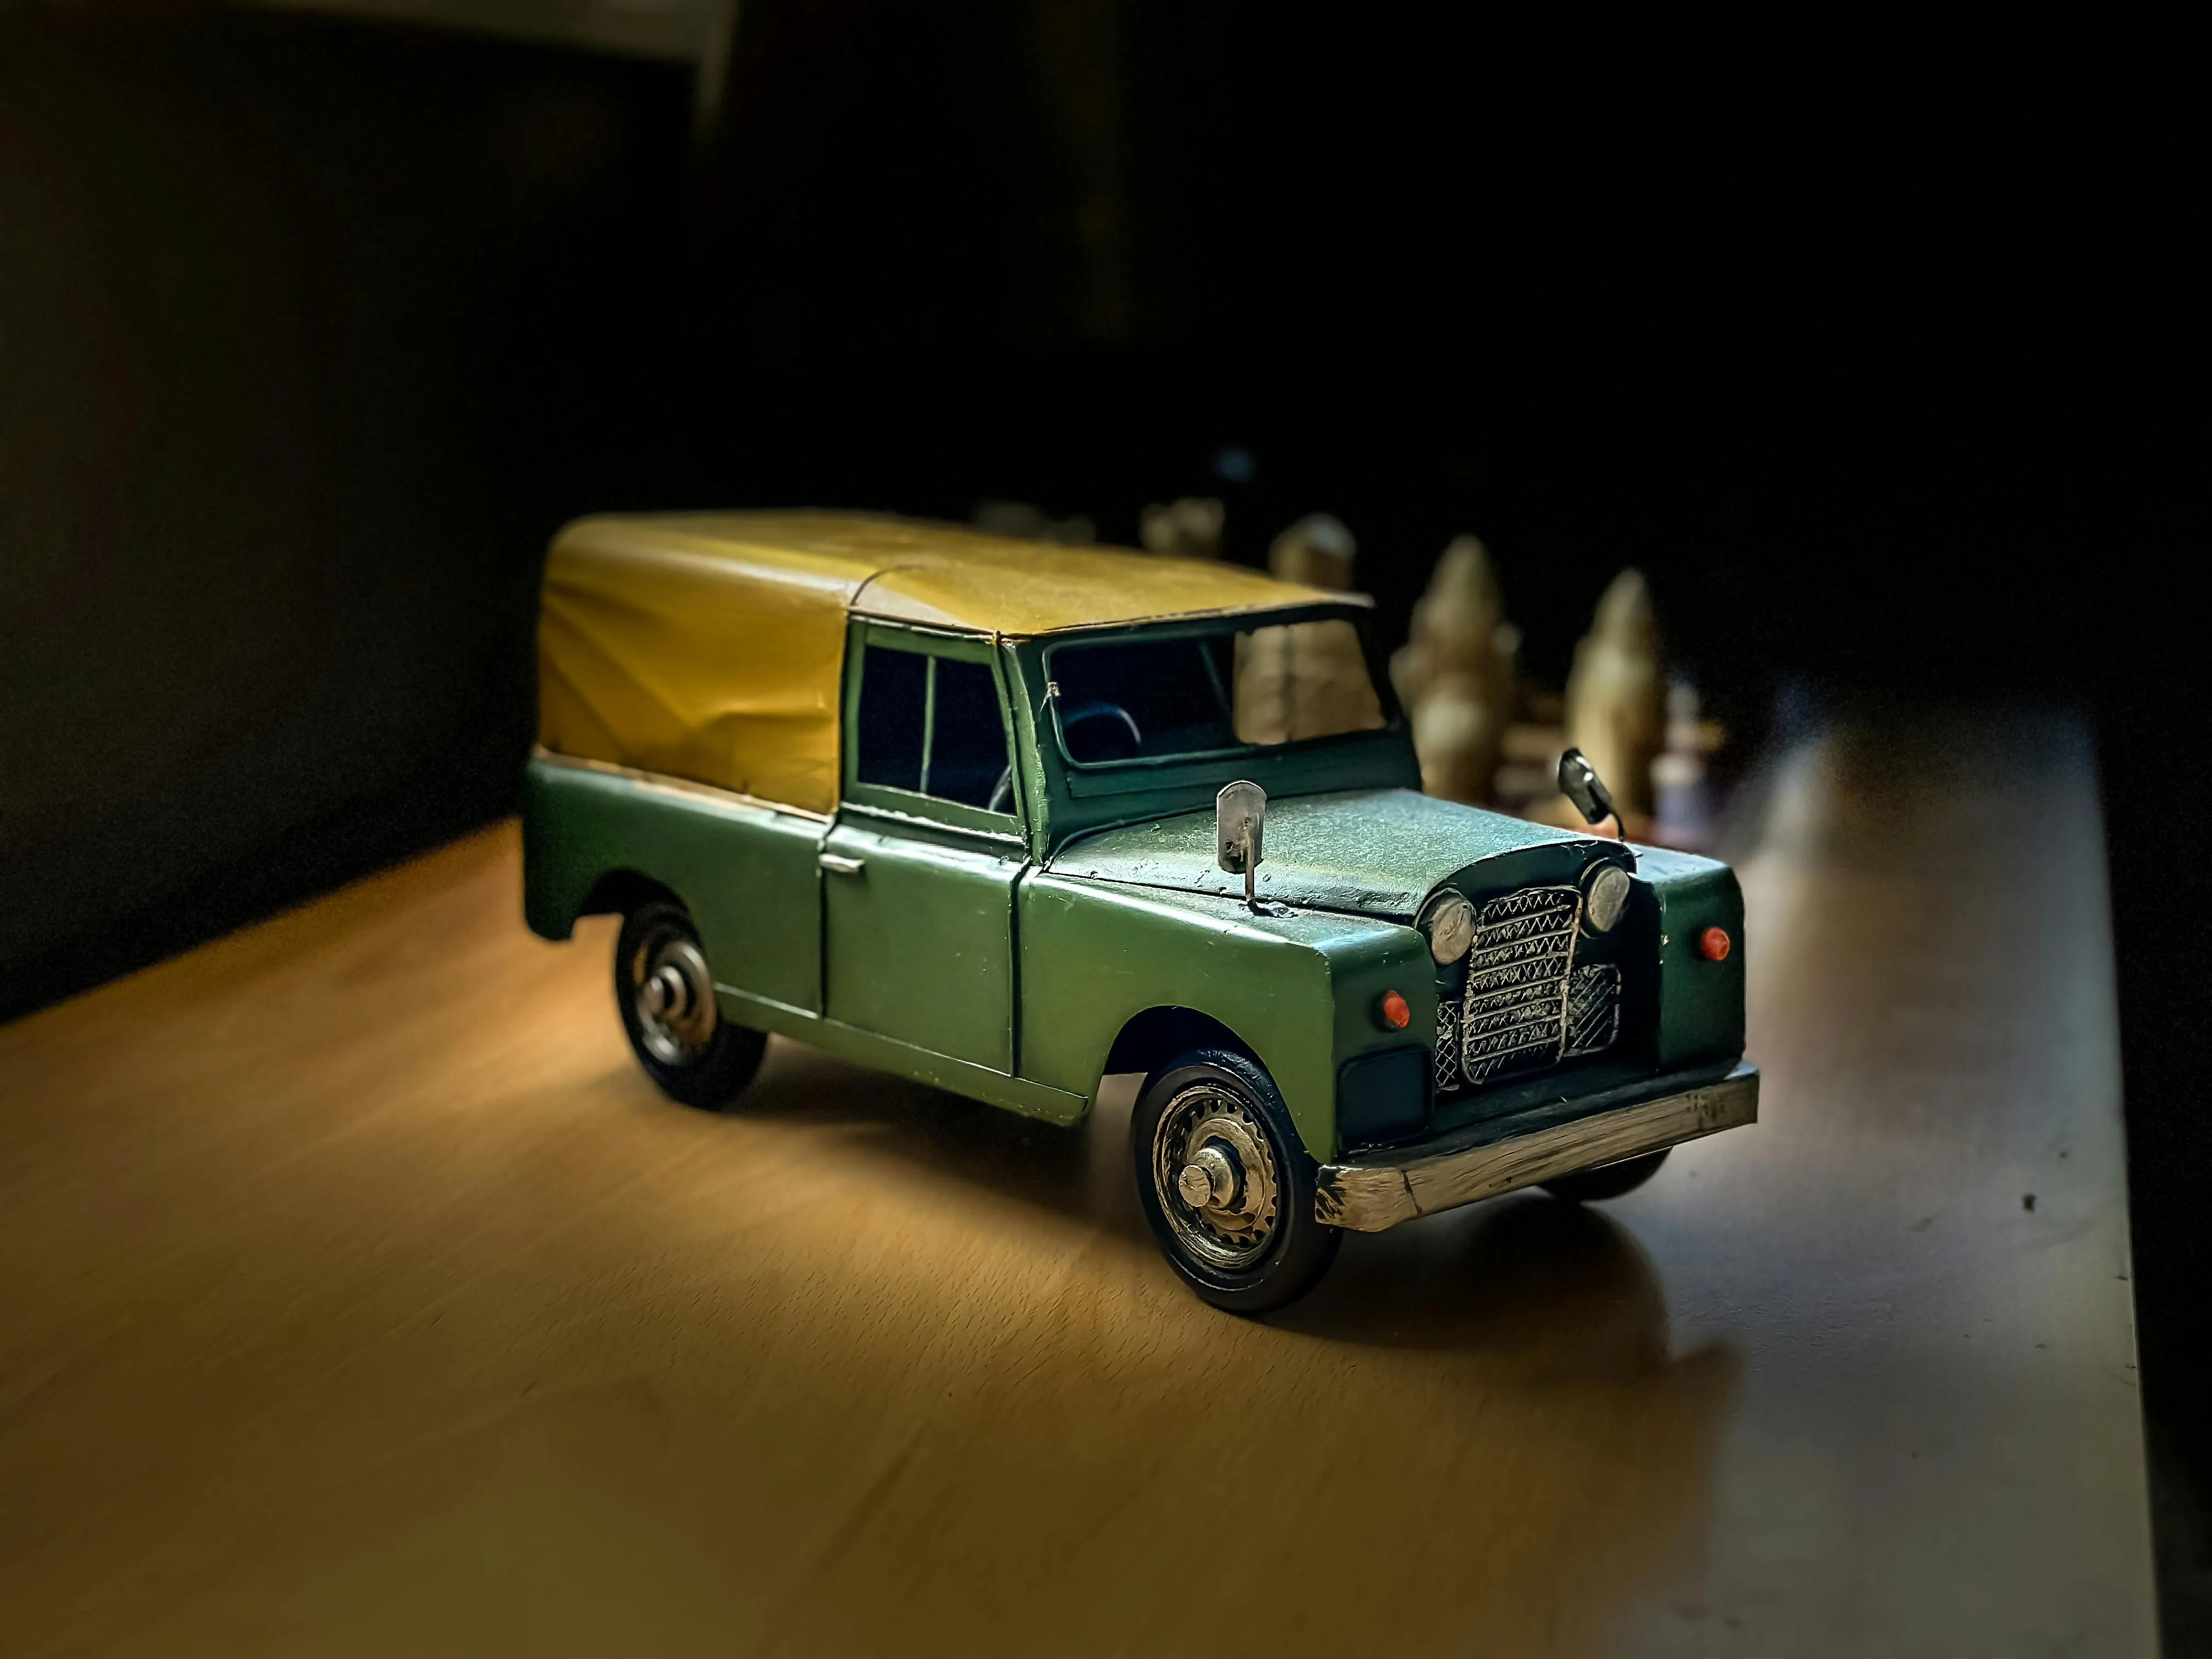 The World of Collectible Vintage Toys